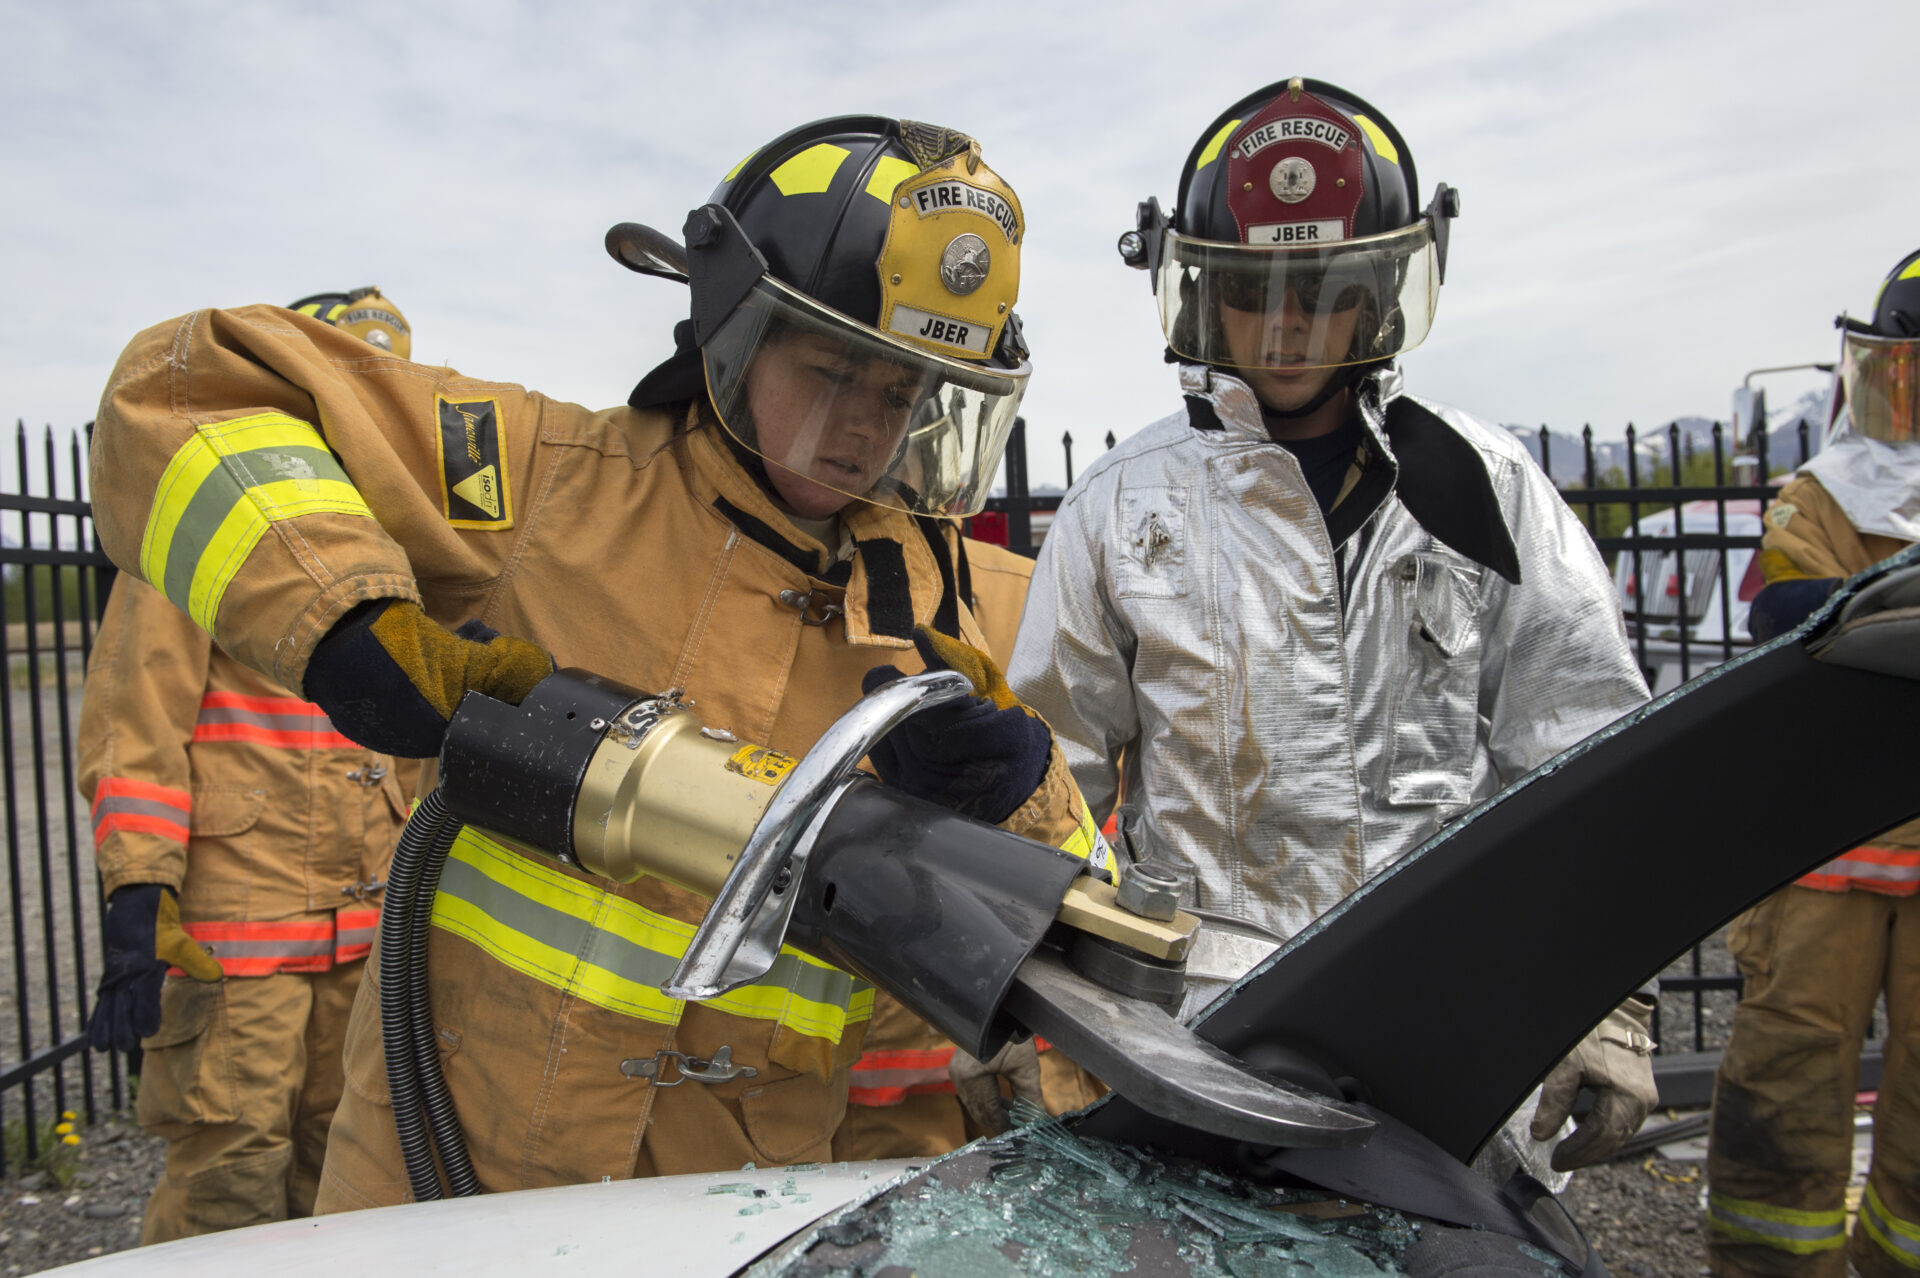 U.S. Air Force Academy cadet Katheryn New, left, a native of Mosca, Colo., operates a hydraulic rescue tool under the supervision of Troy Anthis, a firefighter assigned to the 673rd Civil Engineer Squadron, while conducting rescue training on Joint Base Elmendorf-Richardson, Alaska, May 20, 2015. The training provided the cadets, studying civil engineering, the opportunity to work with Airmen and noncommissioned officers in their field of choice. (U.S. Air Force photo/Alejandro Pena)